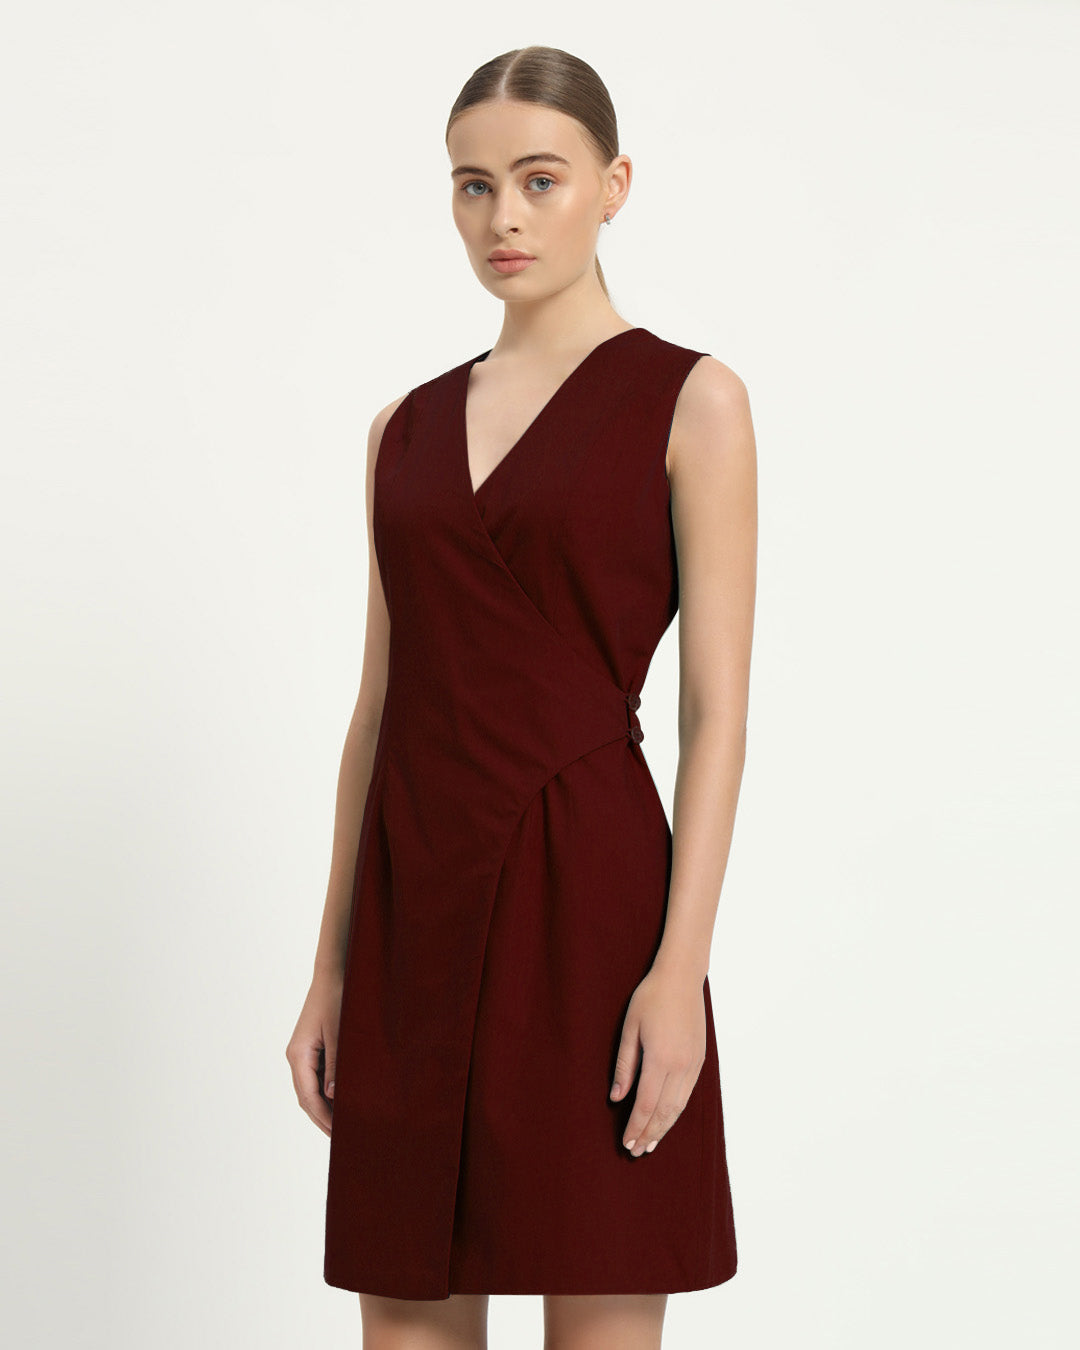 The Augsberg Rouge Cotton Dress